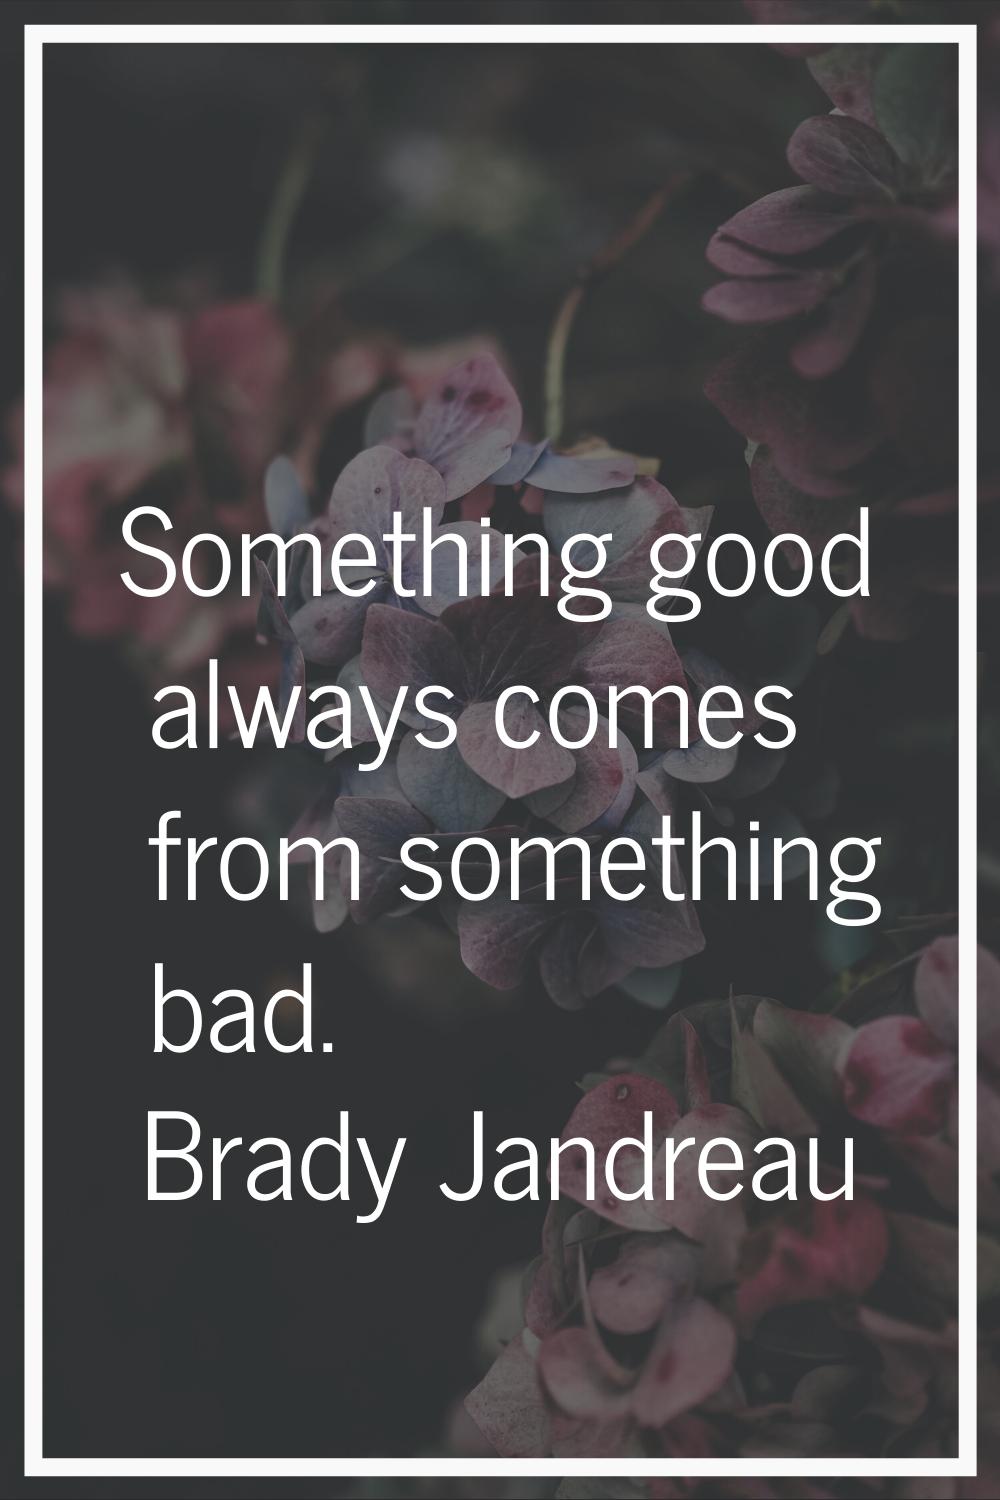 Something good always comes from something bad.